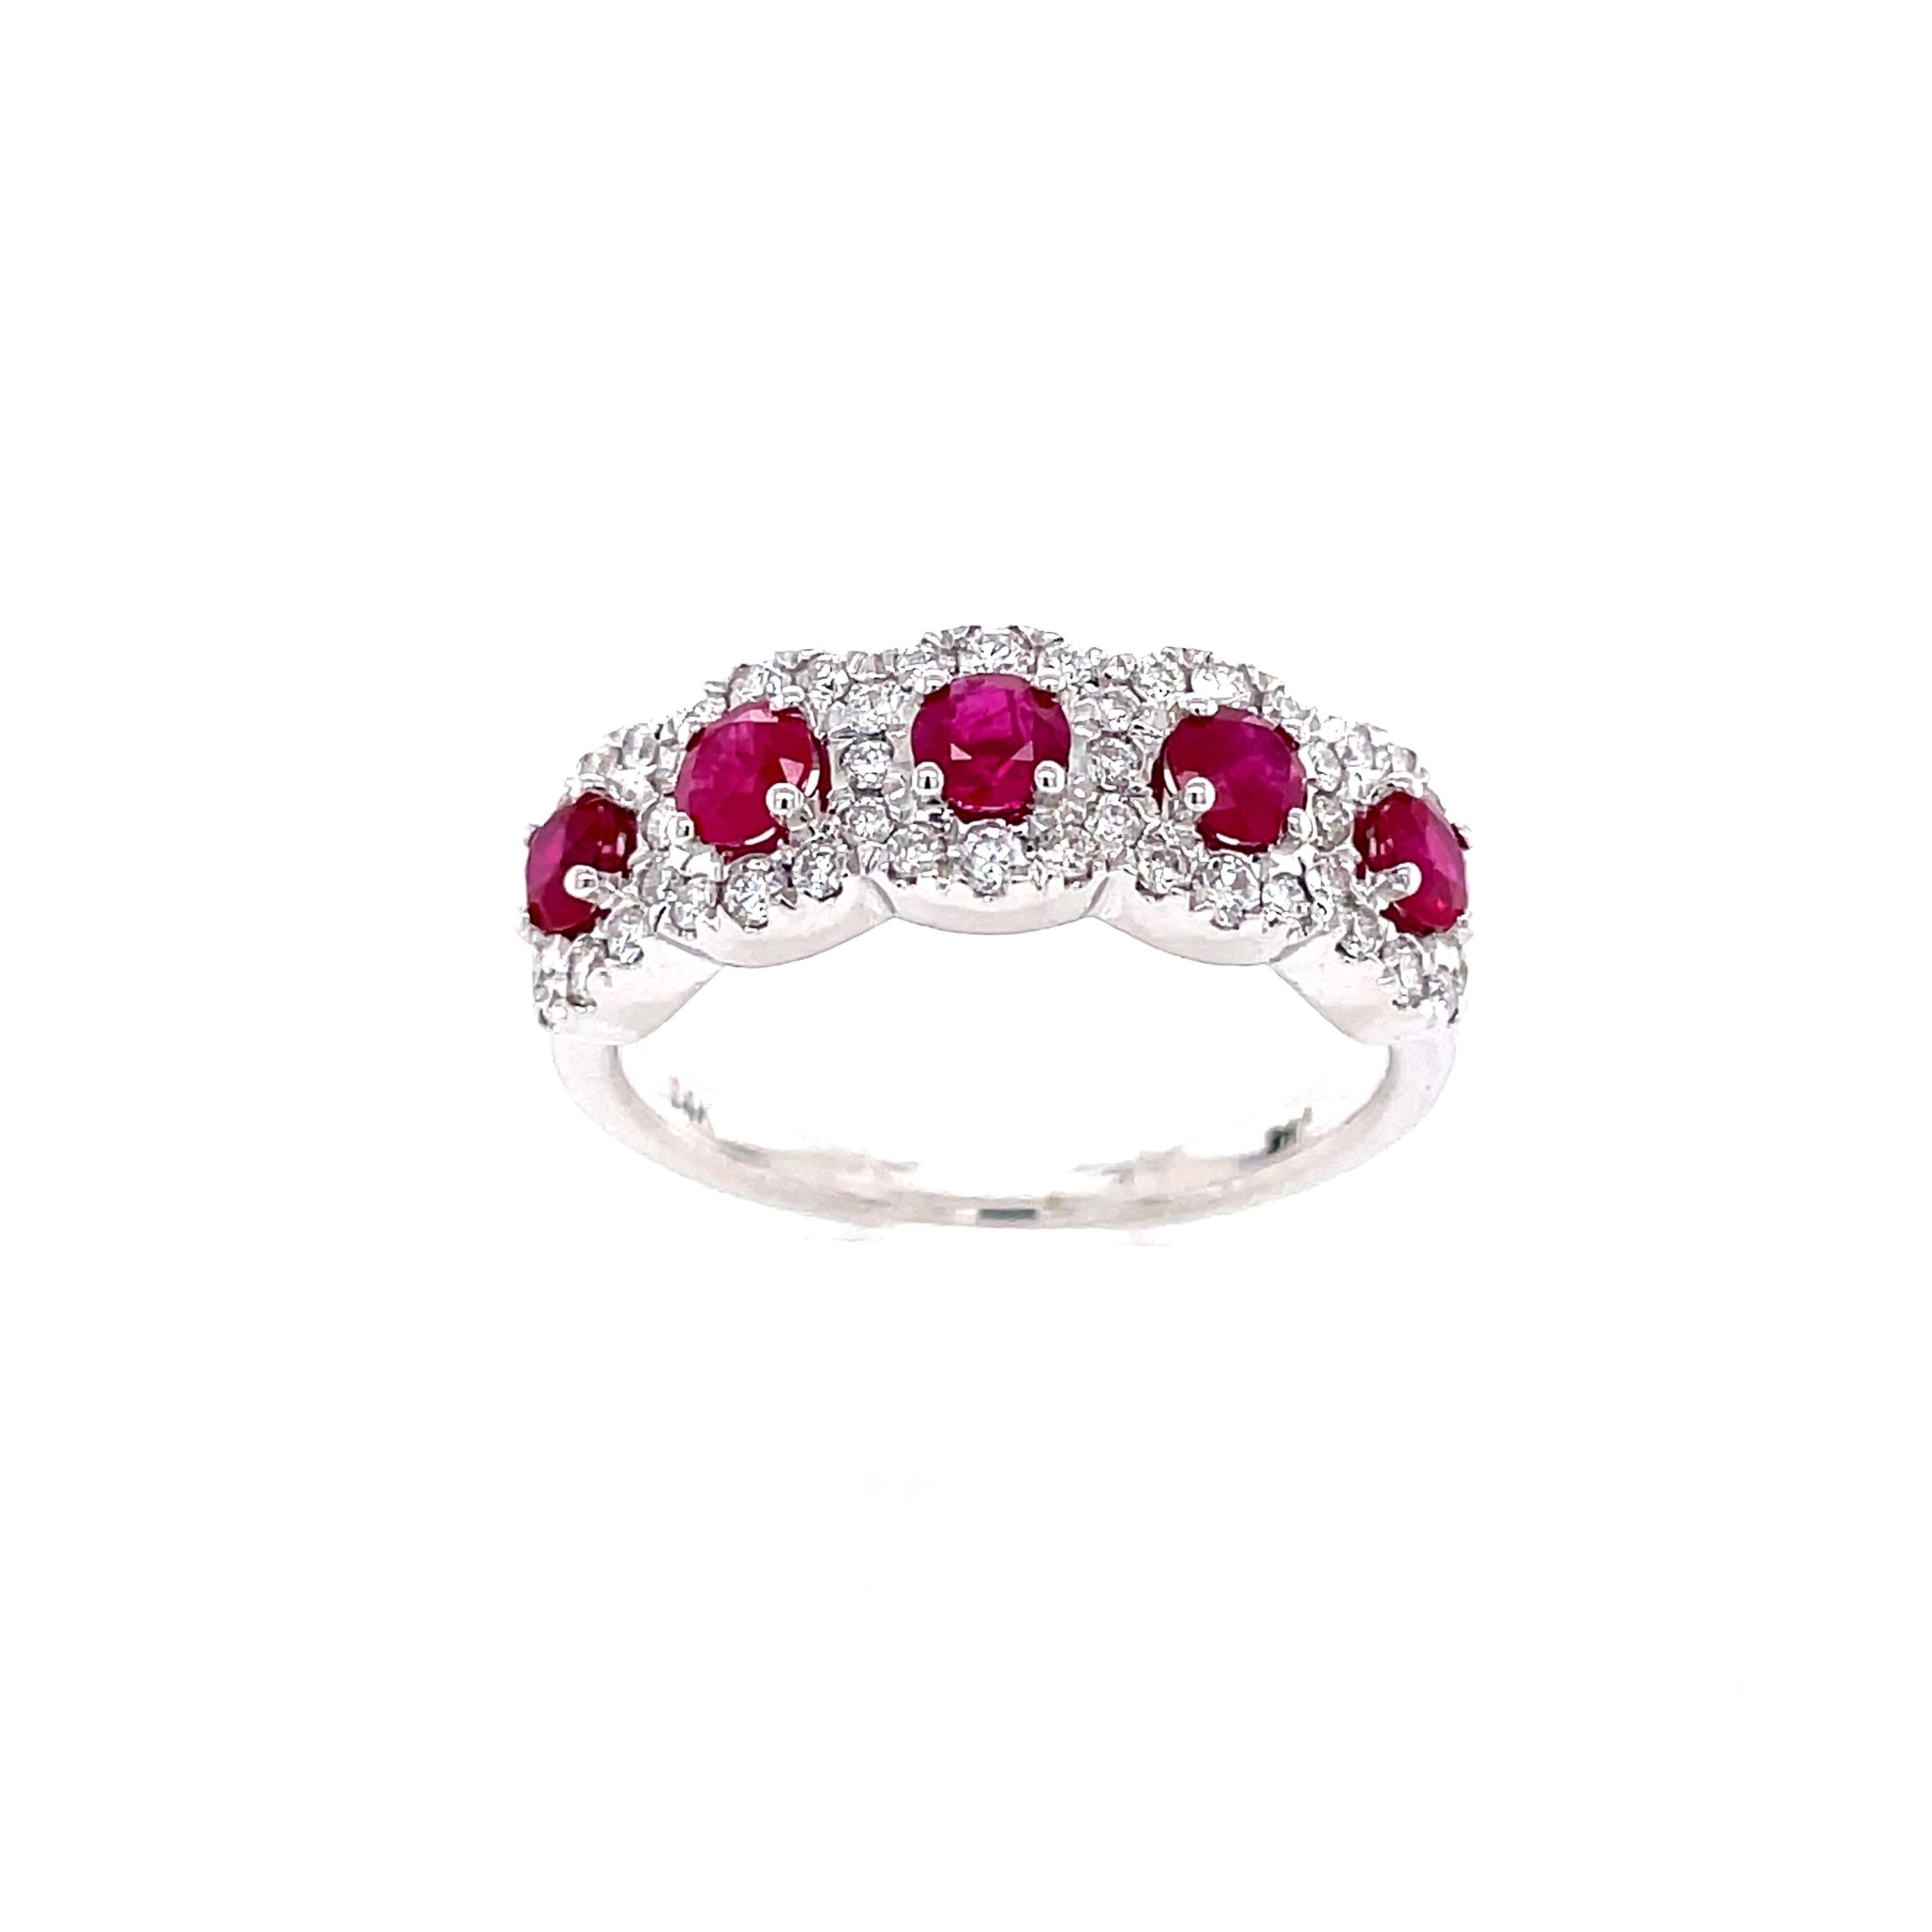 A stunning cocktail ring crafted in 14 karat white gold with 5 round natural ruby stones, (0.15 carats each) weighing a total of 0.75 carats. The measurements for these stones are 3.00 – 3.20mm. This ring also contains 48 natural round brilliant